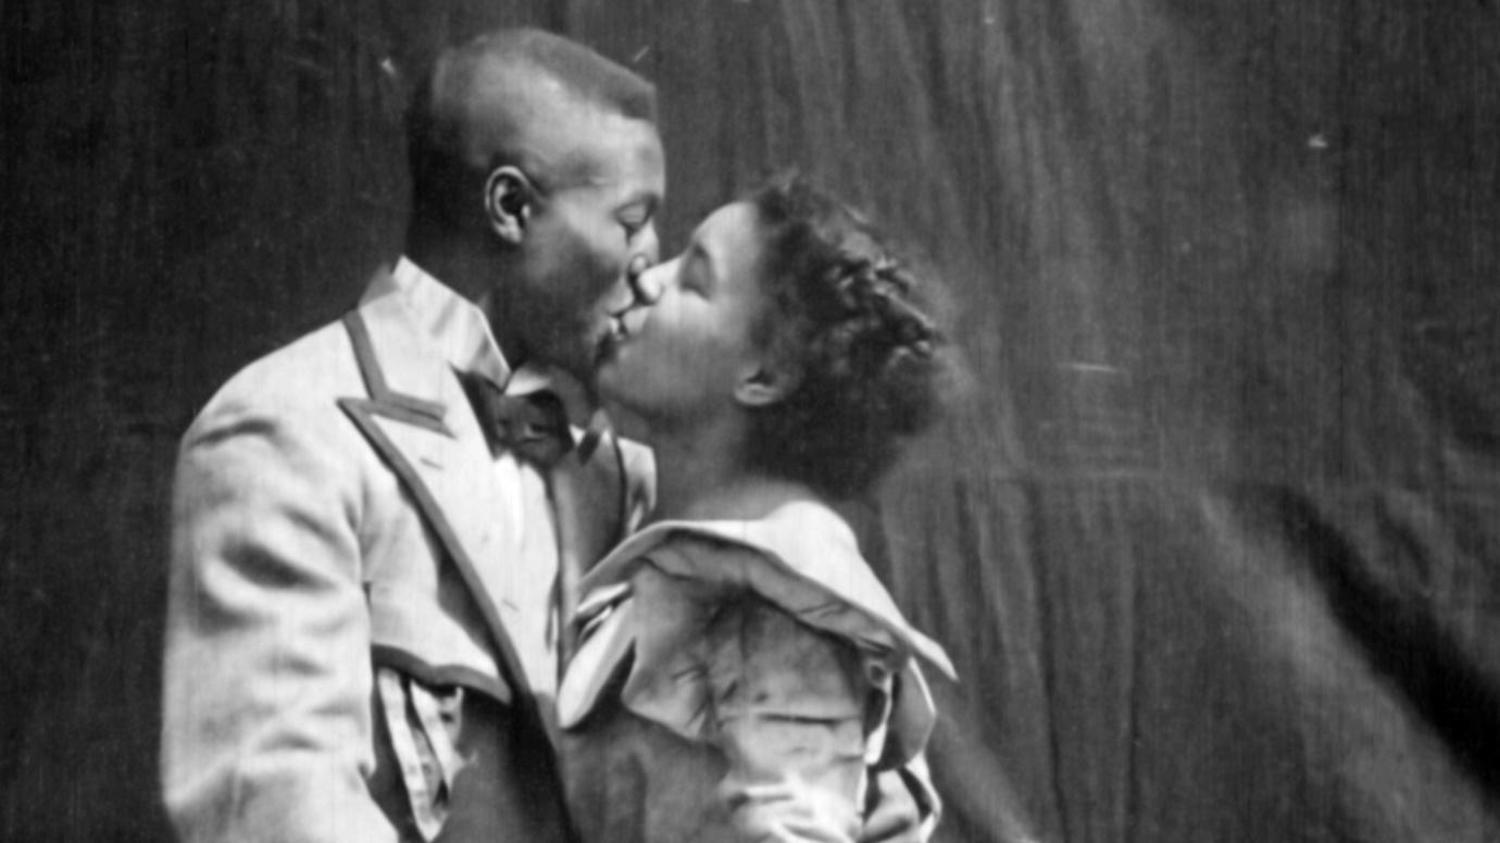 UChicago scholar helps identify 1898 film as earliest depiction of African-American affection | UChicago